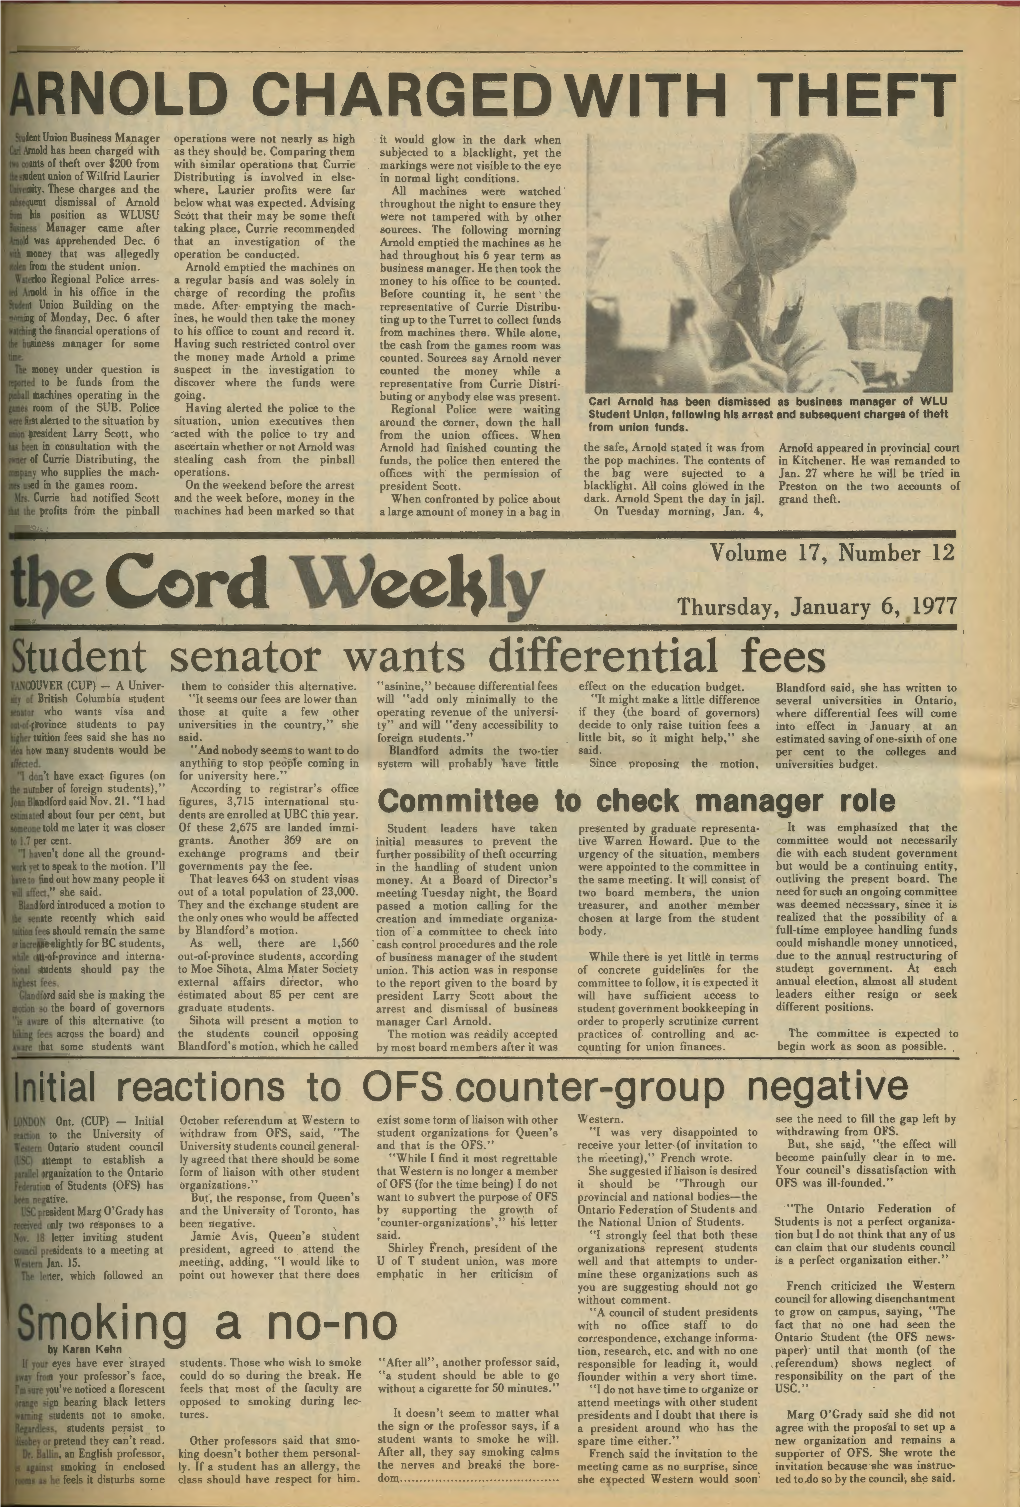 The Cord Weekly (January 6, 1977)